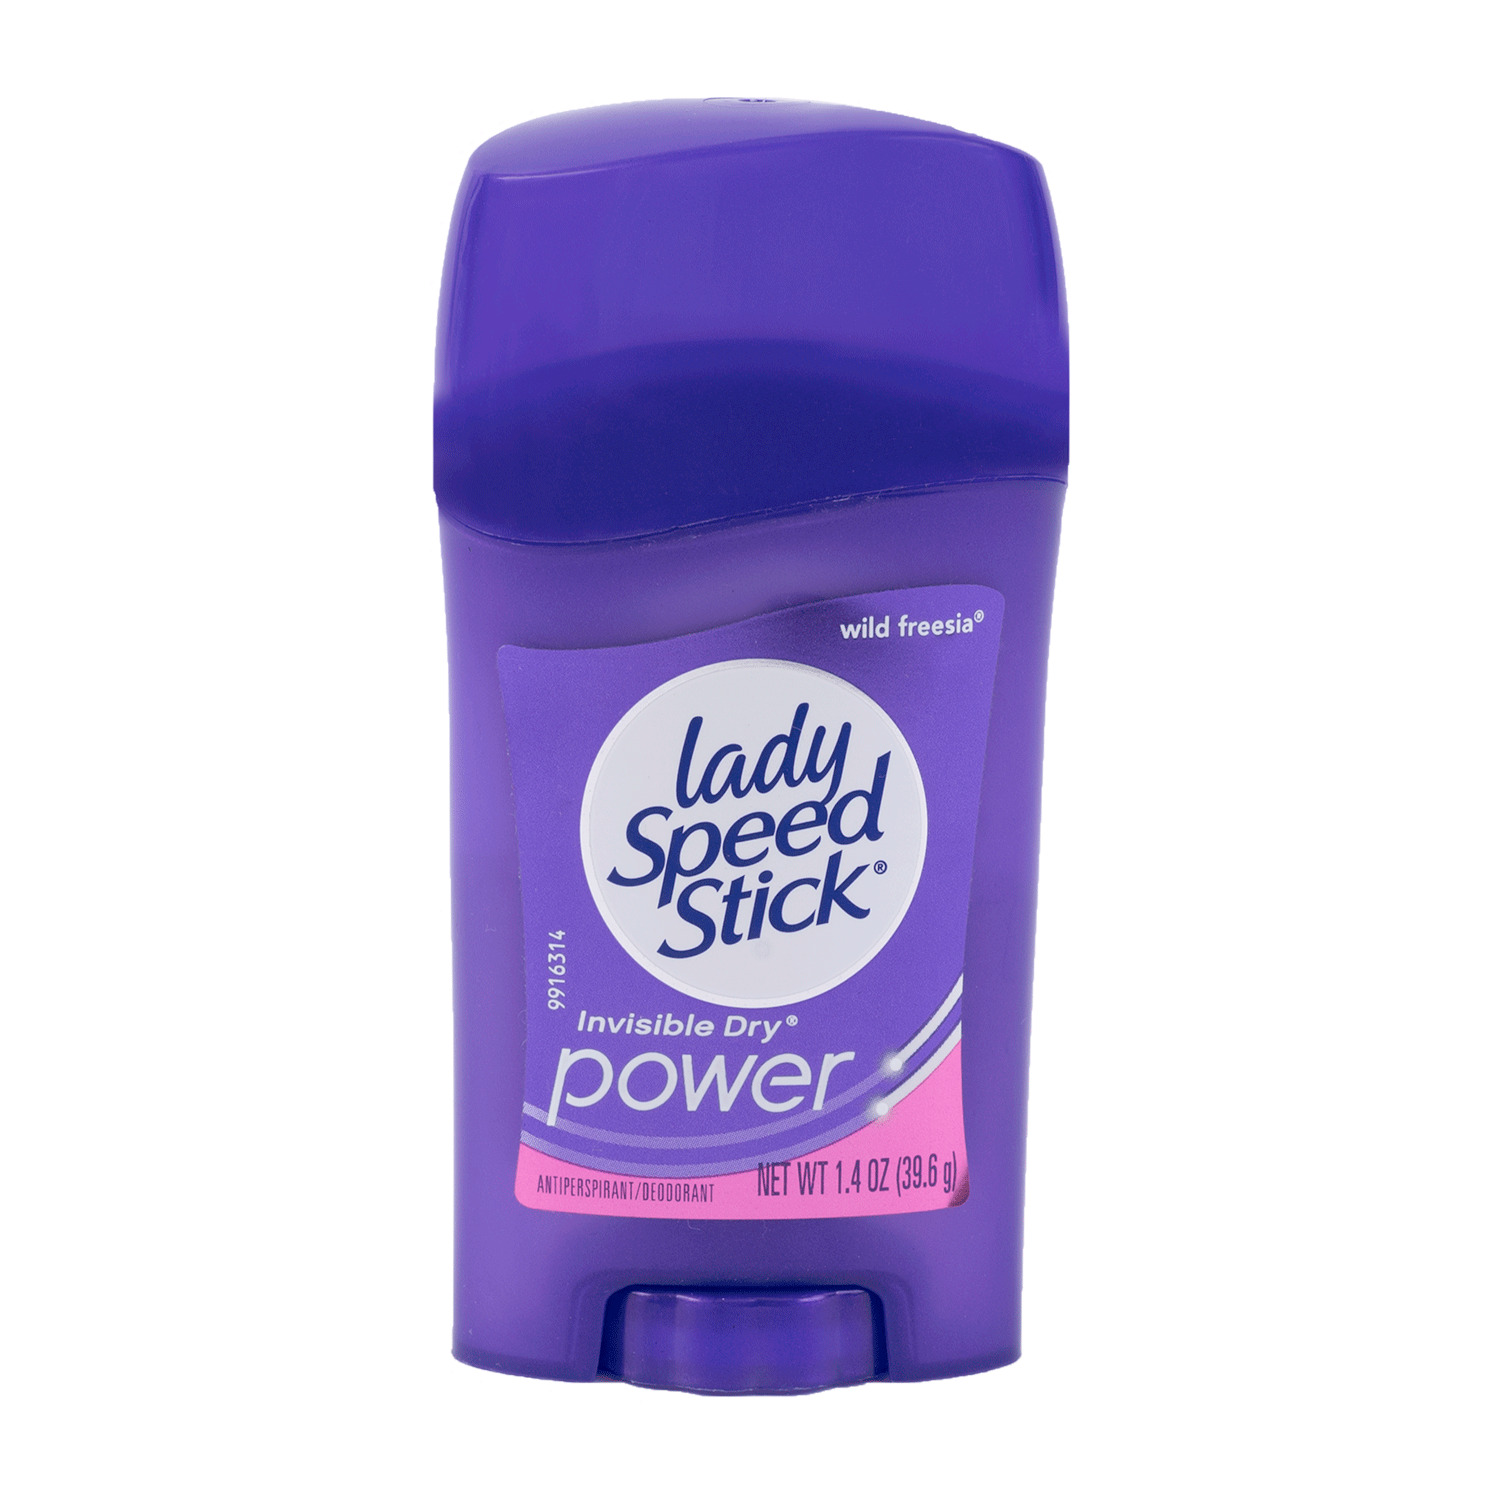 Lady Speed Stick - Power - Déodorant anti-transp  irant sec invisible, 40g - Freesia sauvage